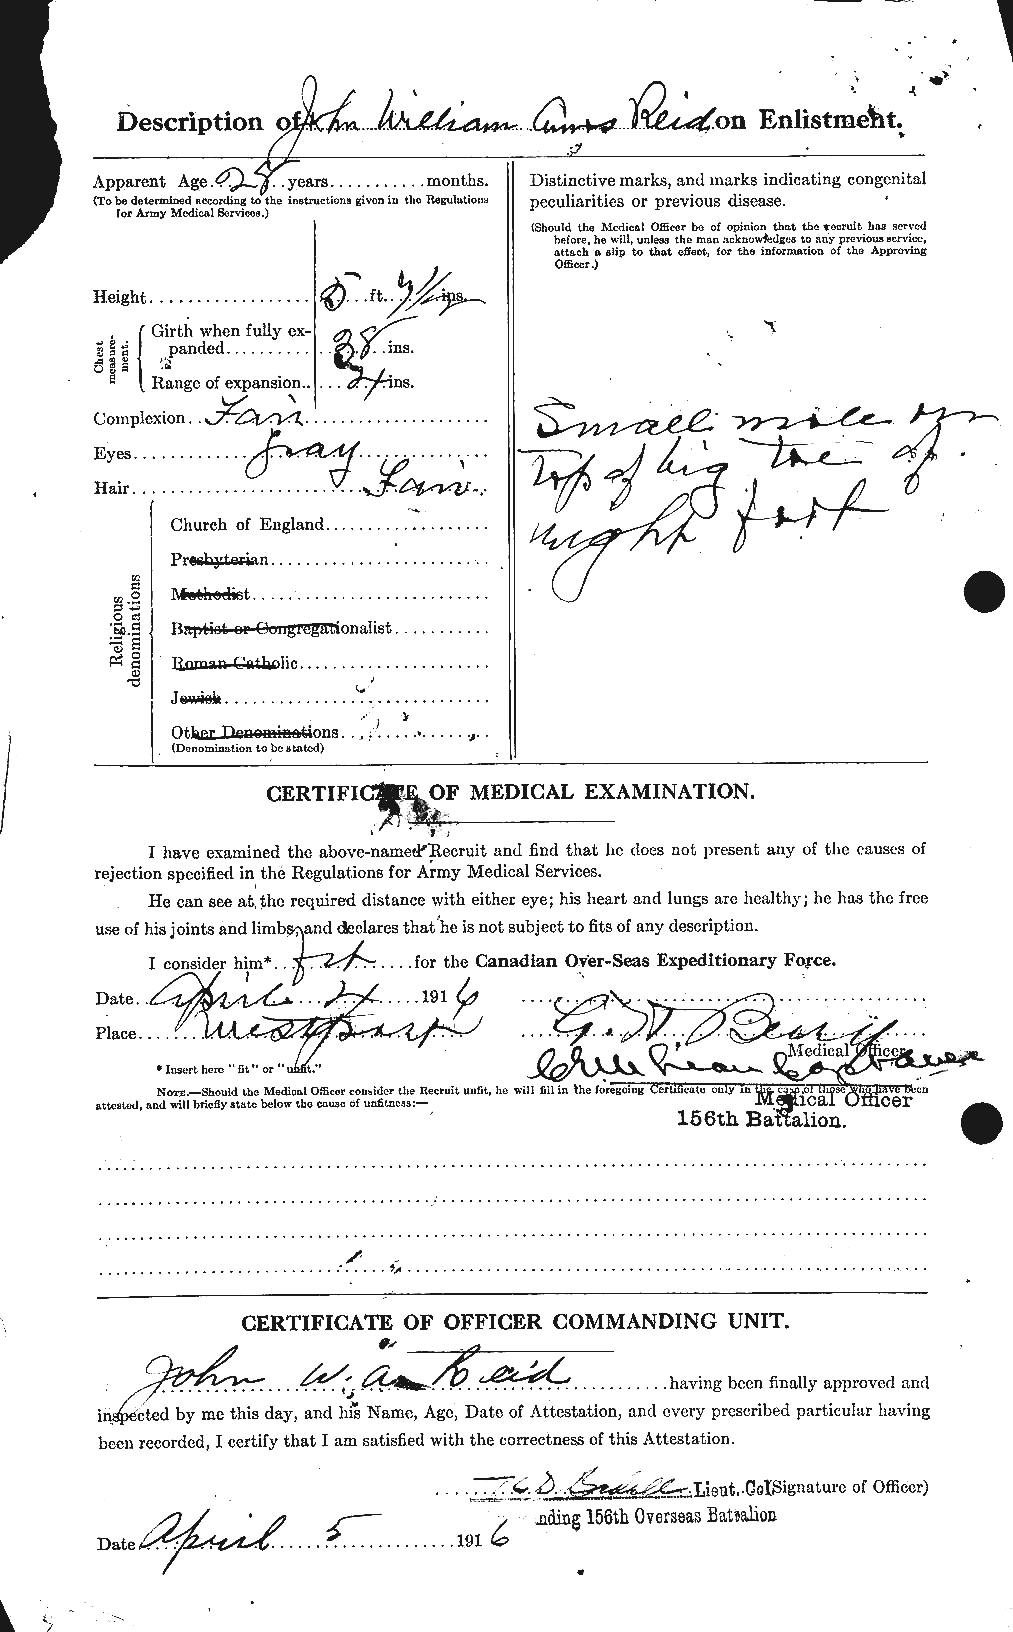 Personnel Records of the First World War - CEF 598887b